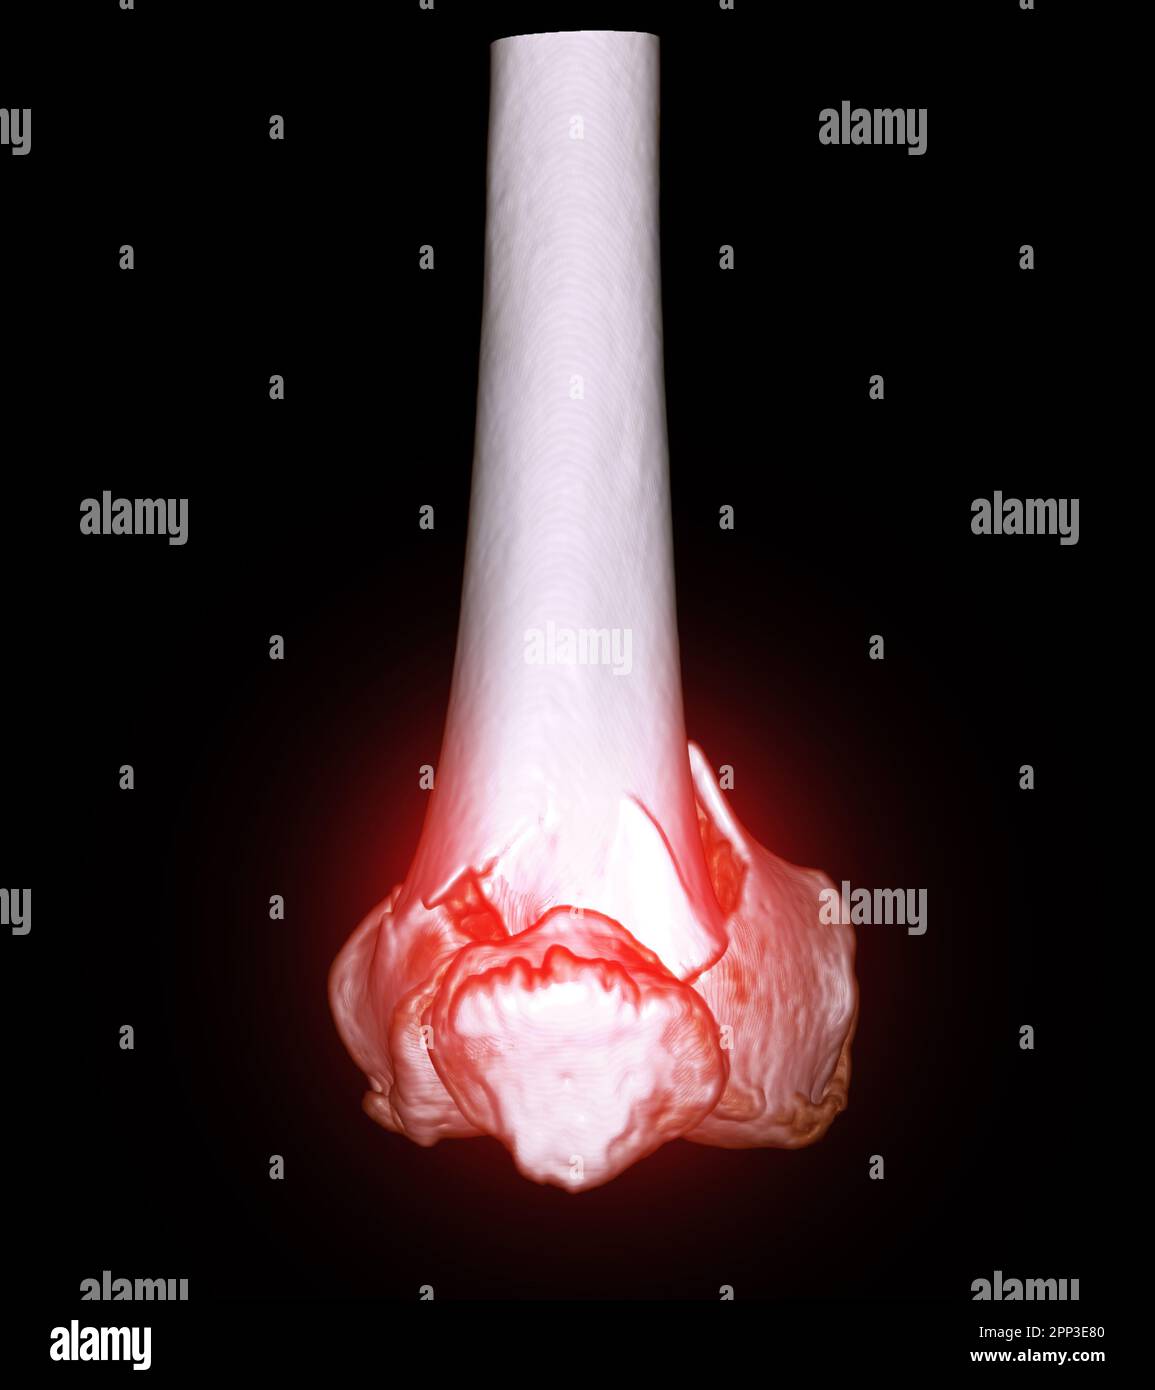 CT scan of knee joint 3D rendering image  showing fracture of distal femur bone. Stock Photo